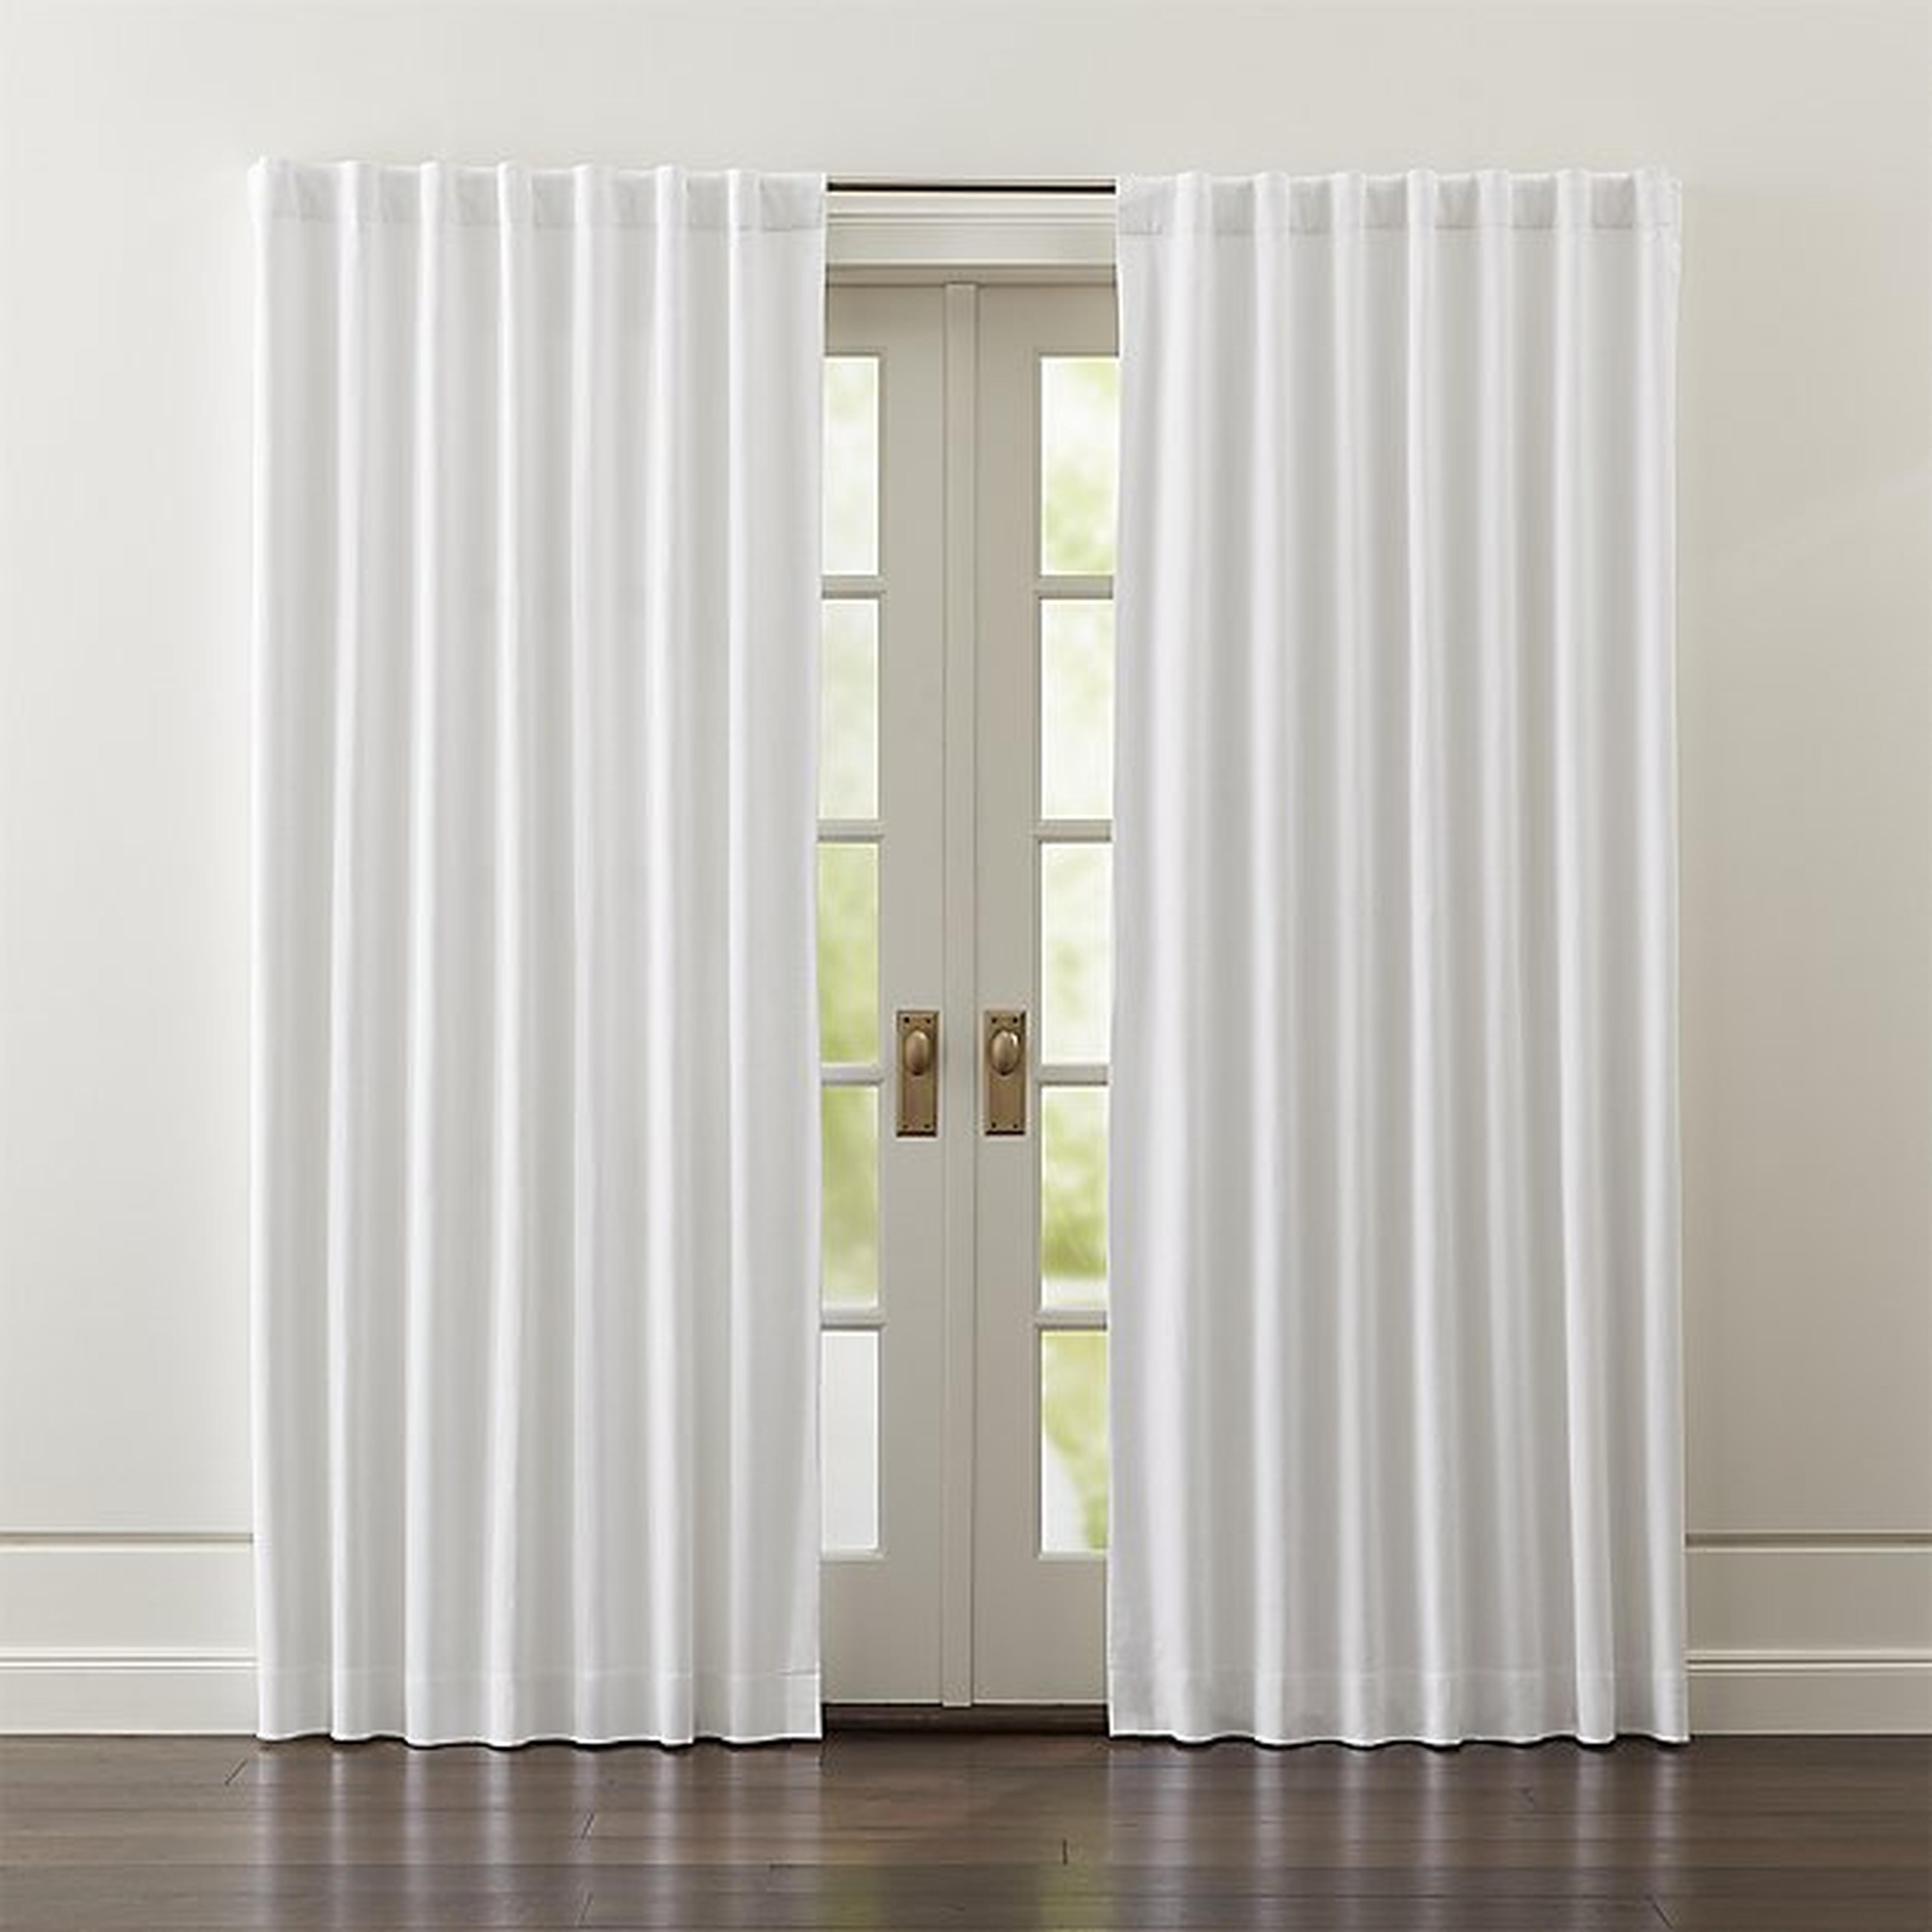 Wallace Blackout Curtains, White, 52" x 84" - Crate and Barrel